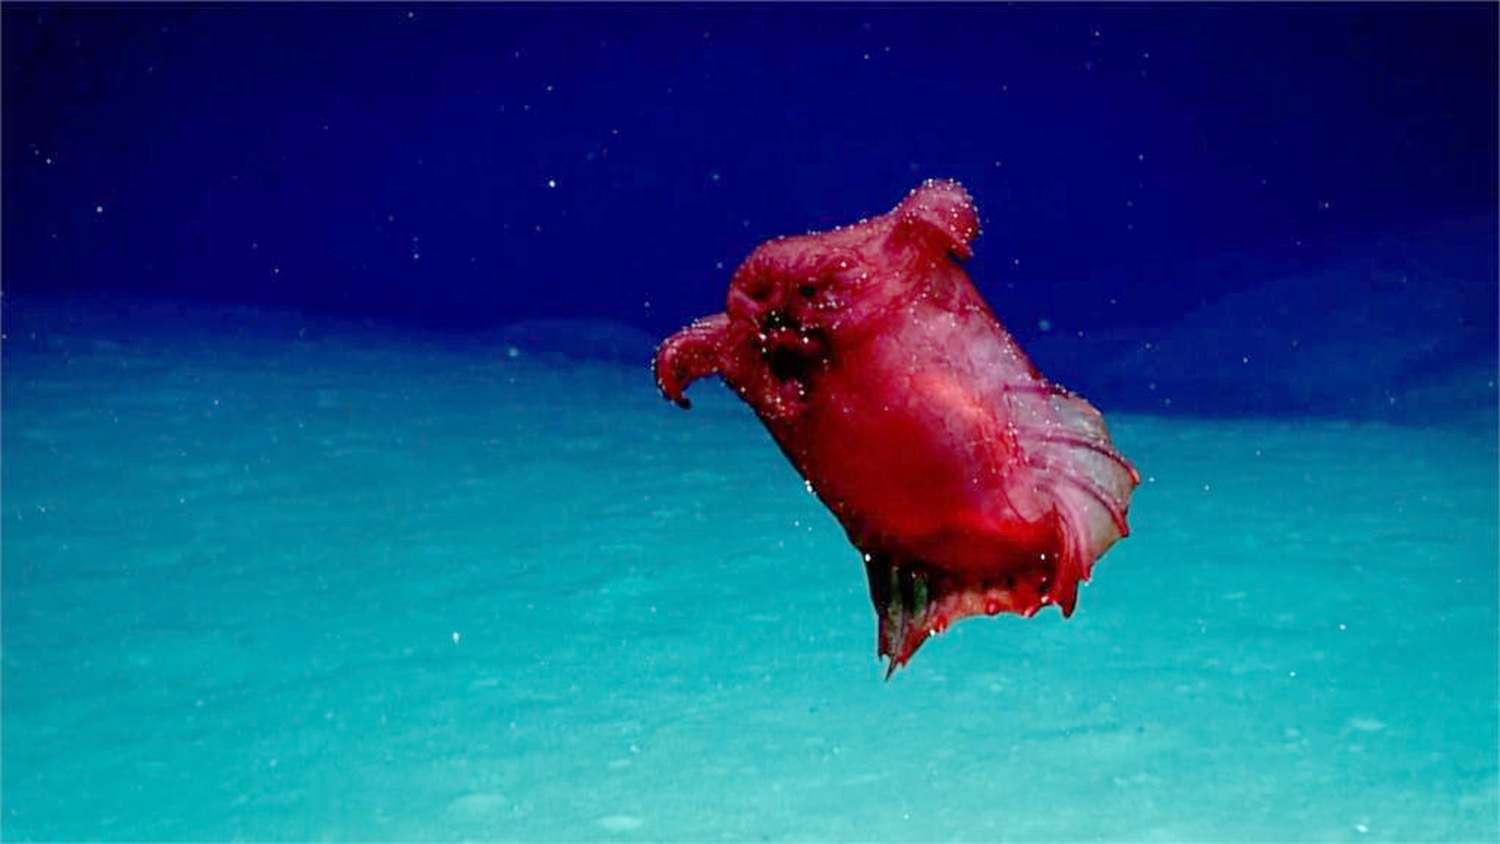 Rarely seen 'headless chicken monster' — actually a sea cucumber — spotted  in Southern Ocean